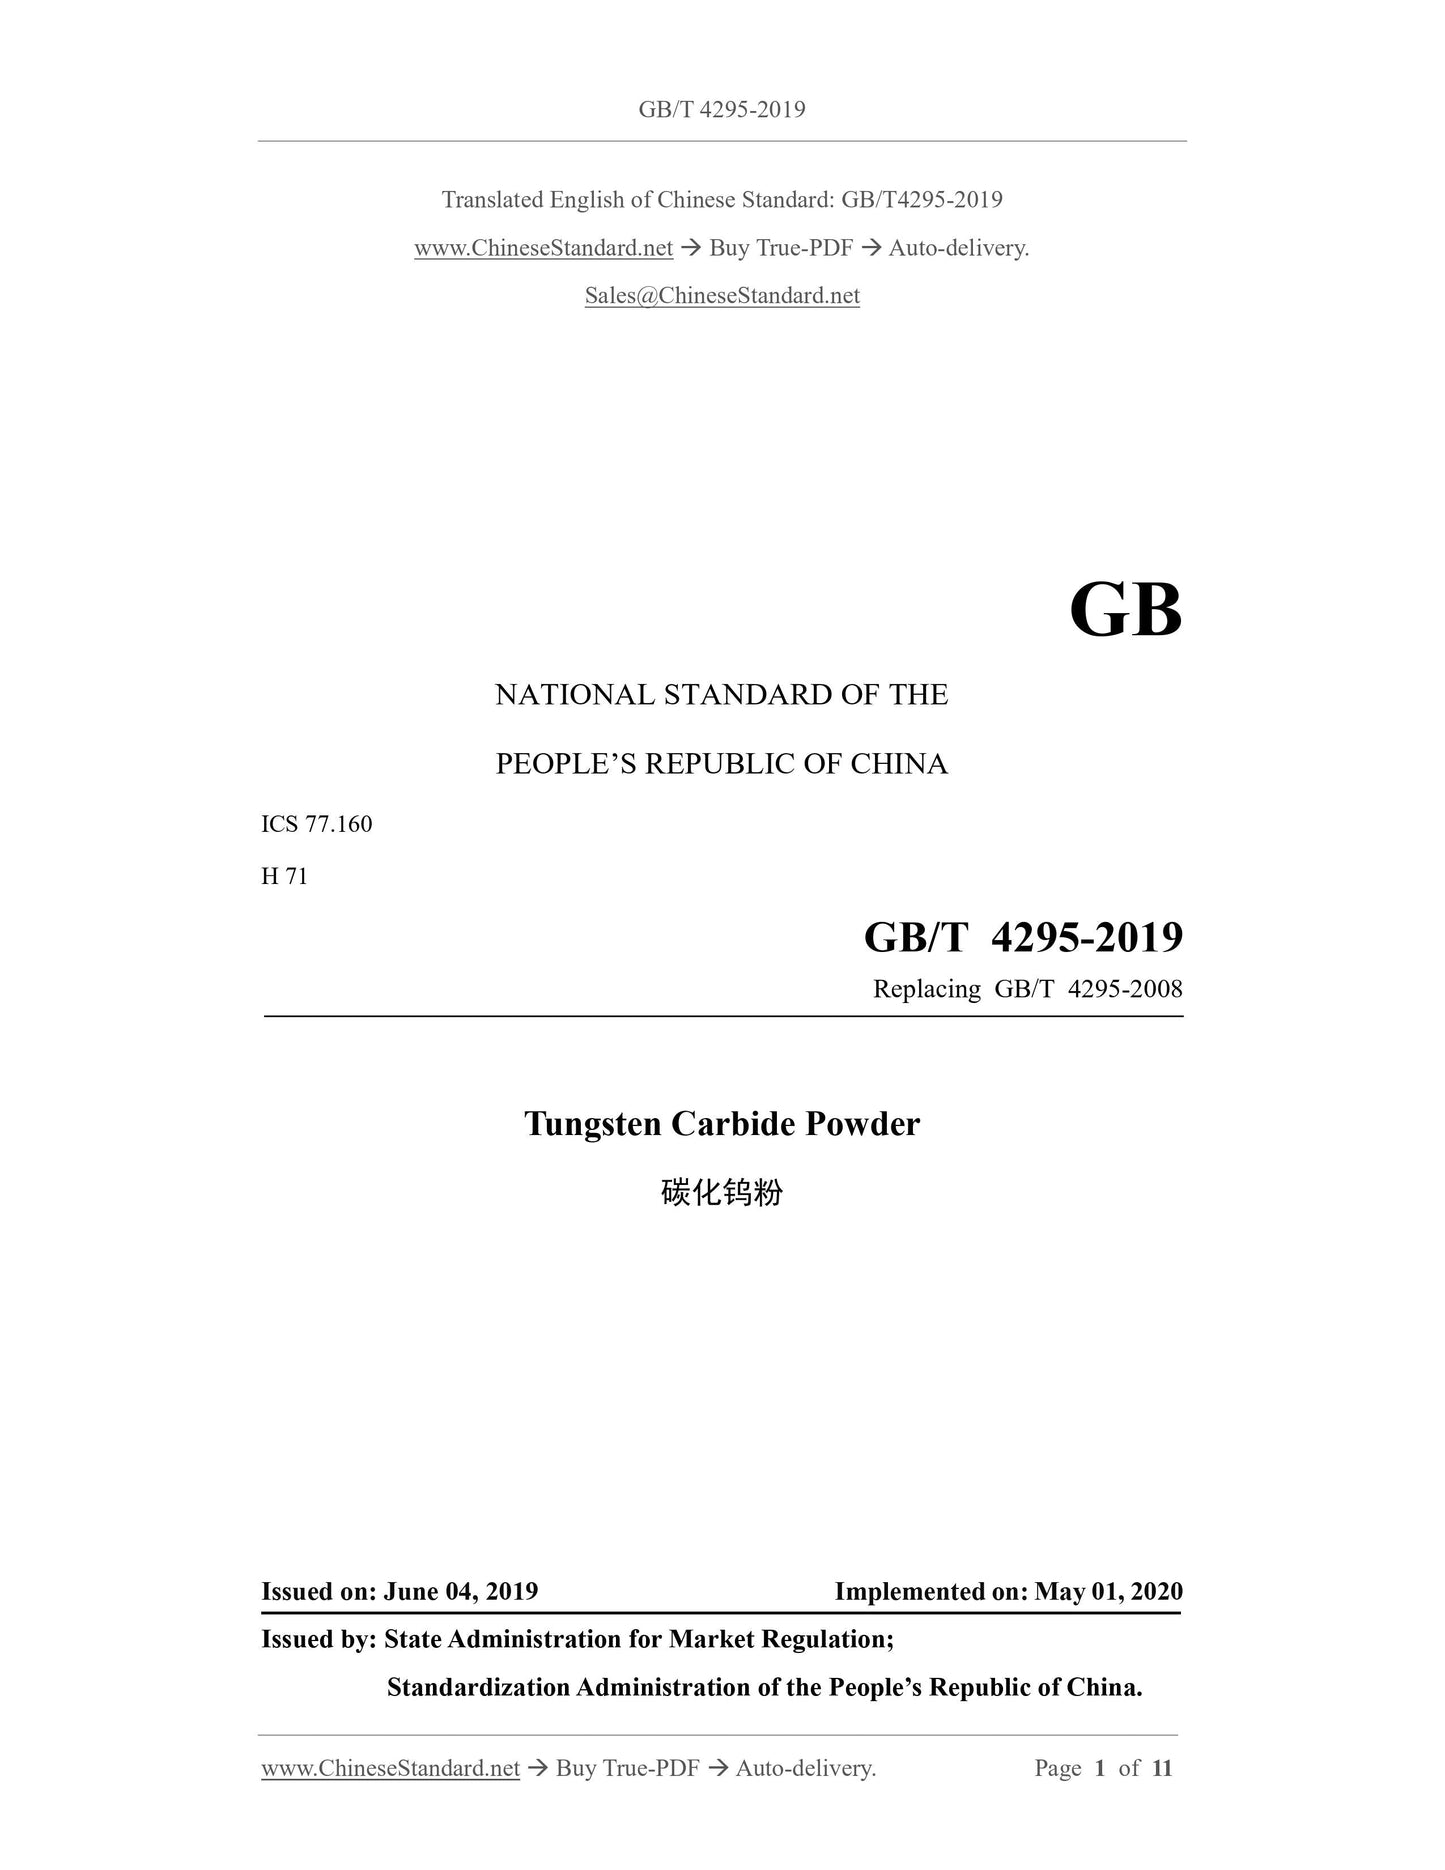 GB/T 4295-2019 Page 1